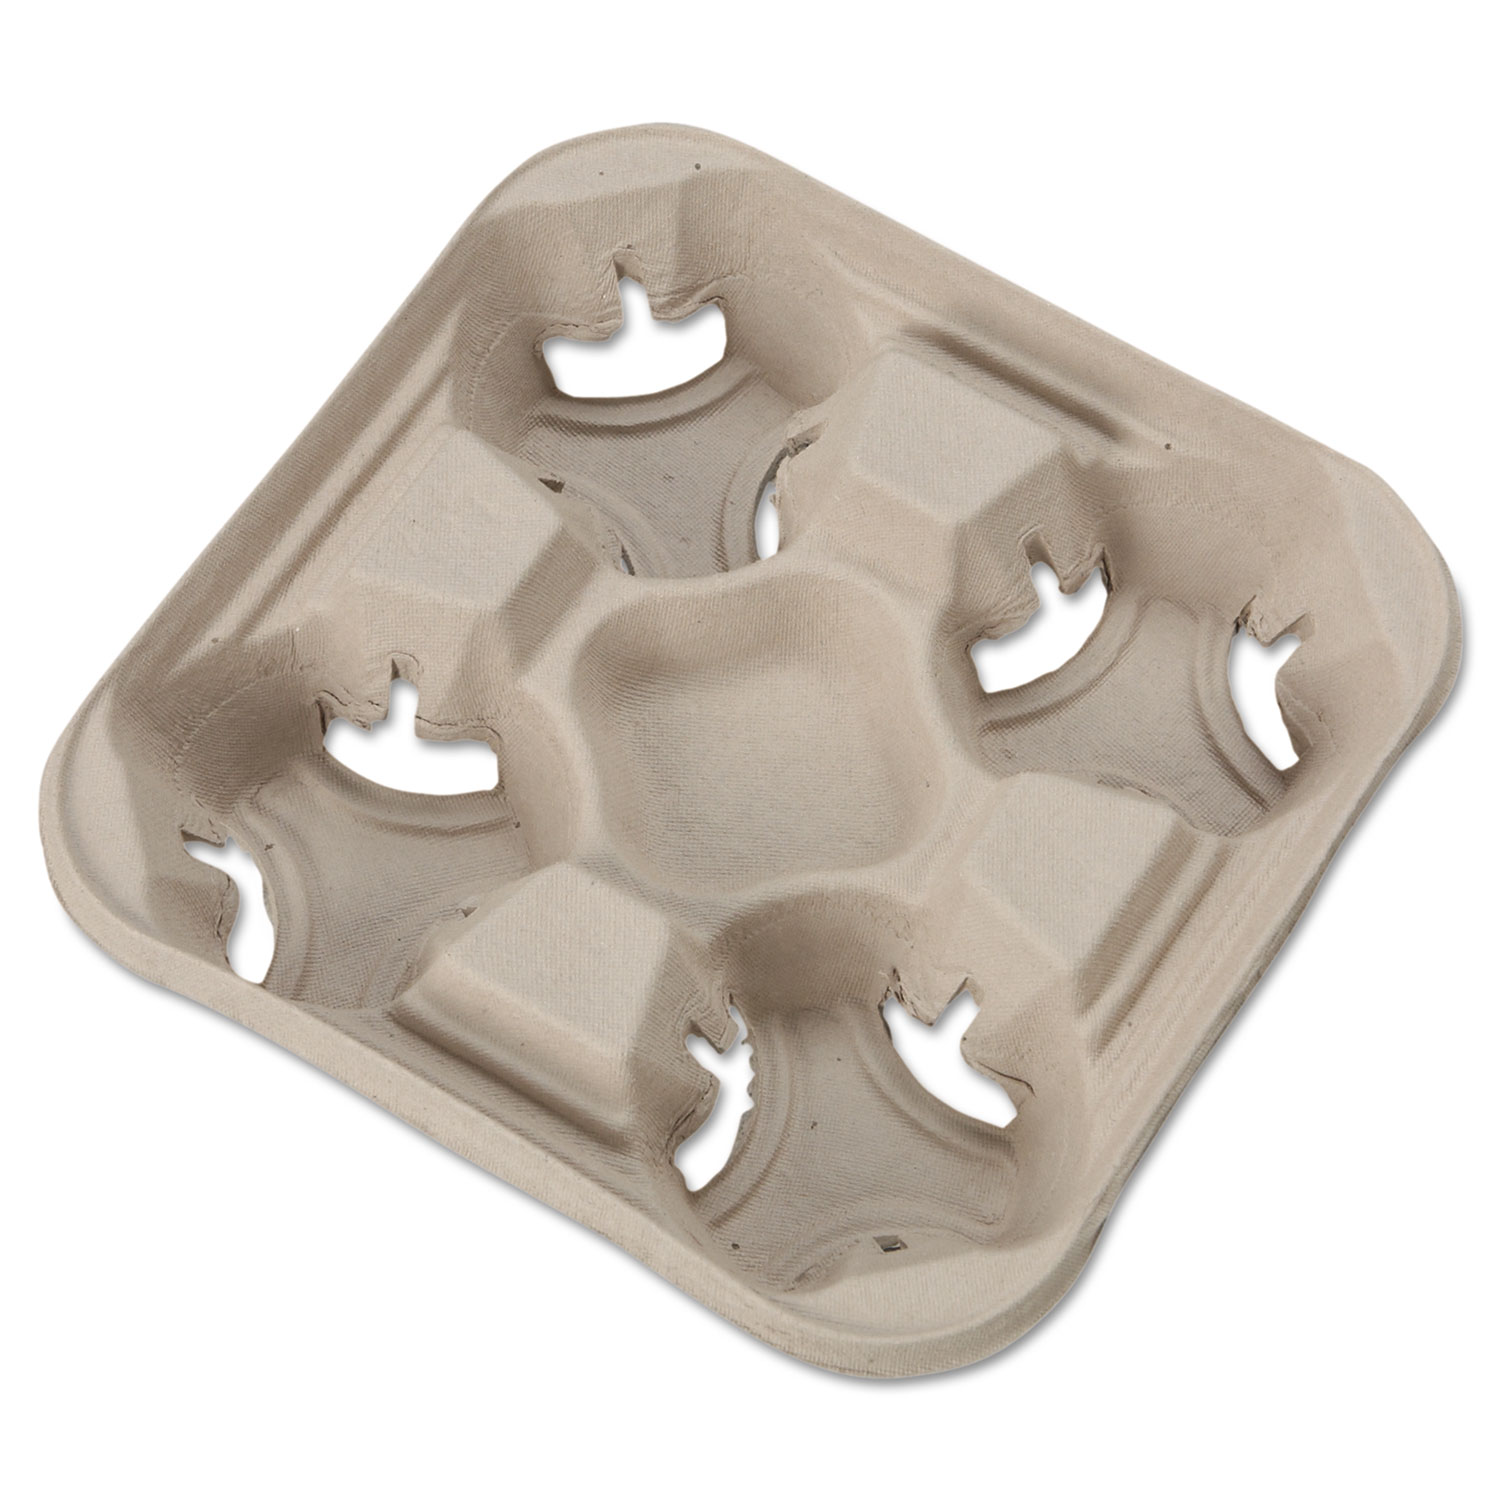 StrongHolder Molded Fiber Cup Trays, 8-32oz, Four Cups, 300/Carton